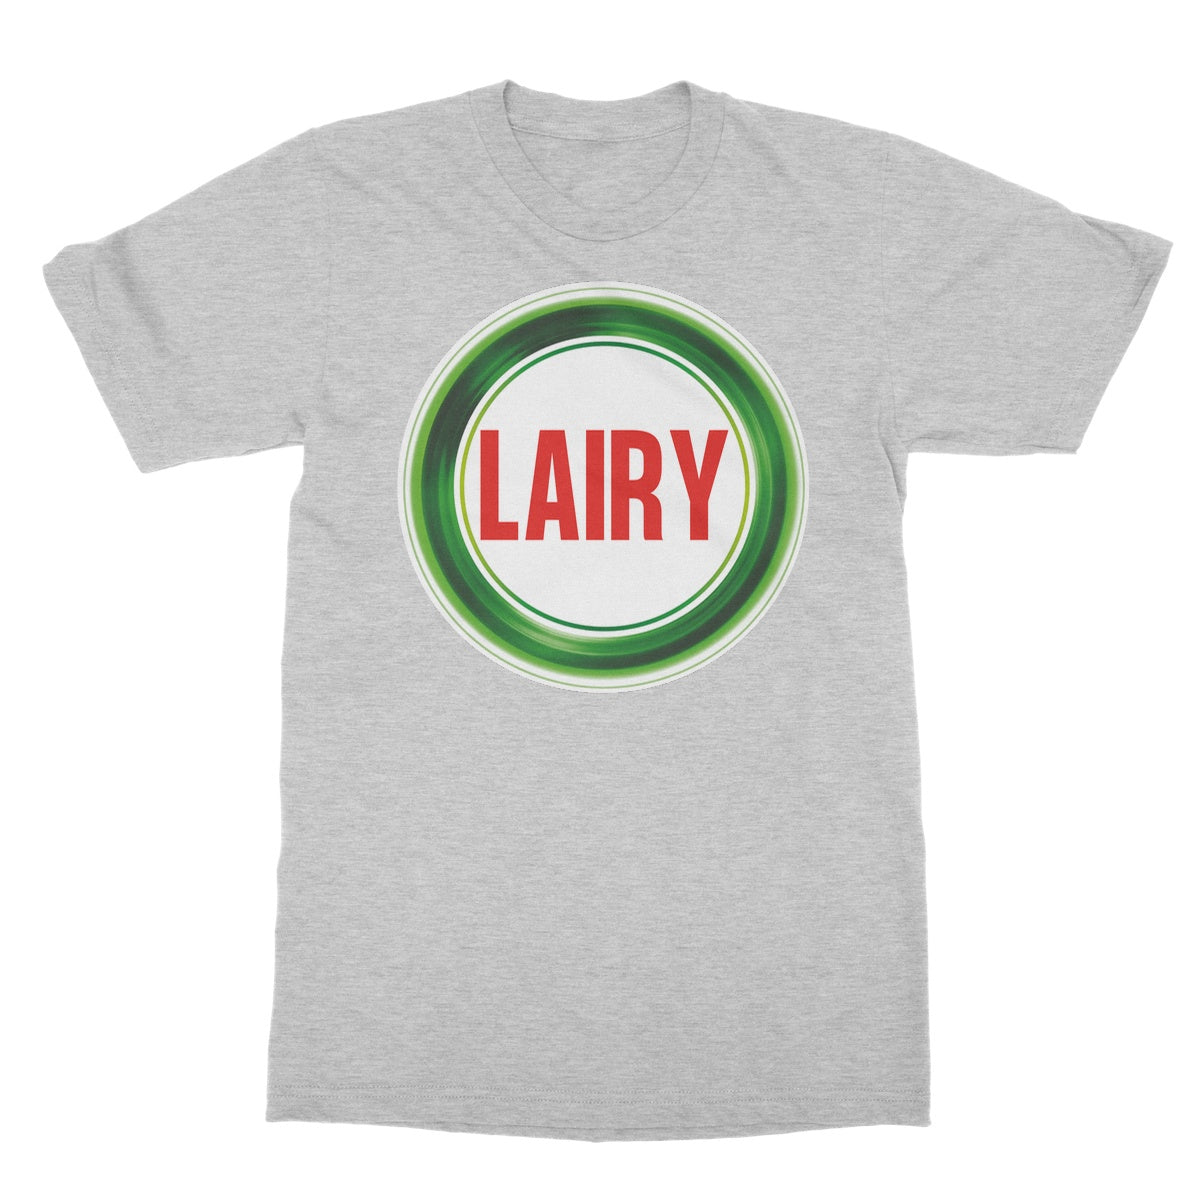 lairy t shirt grey